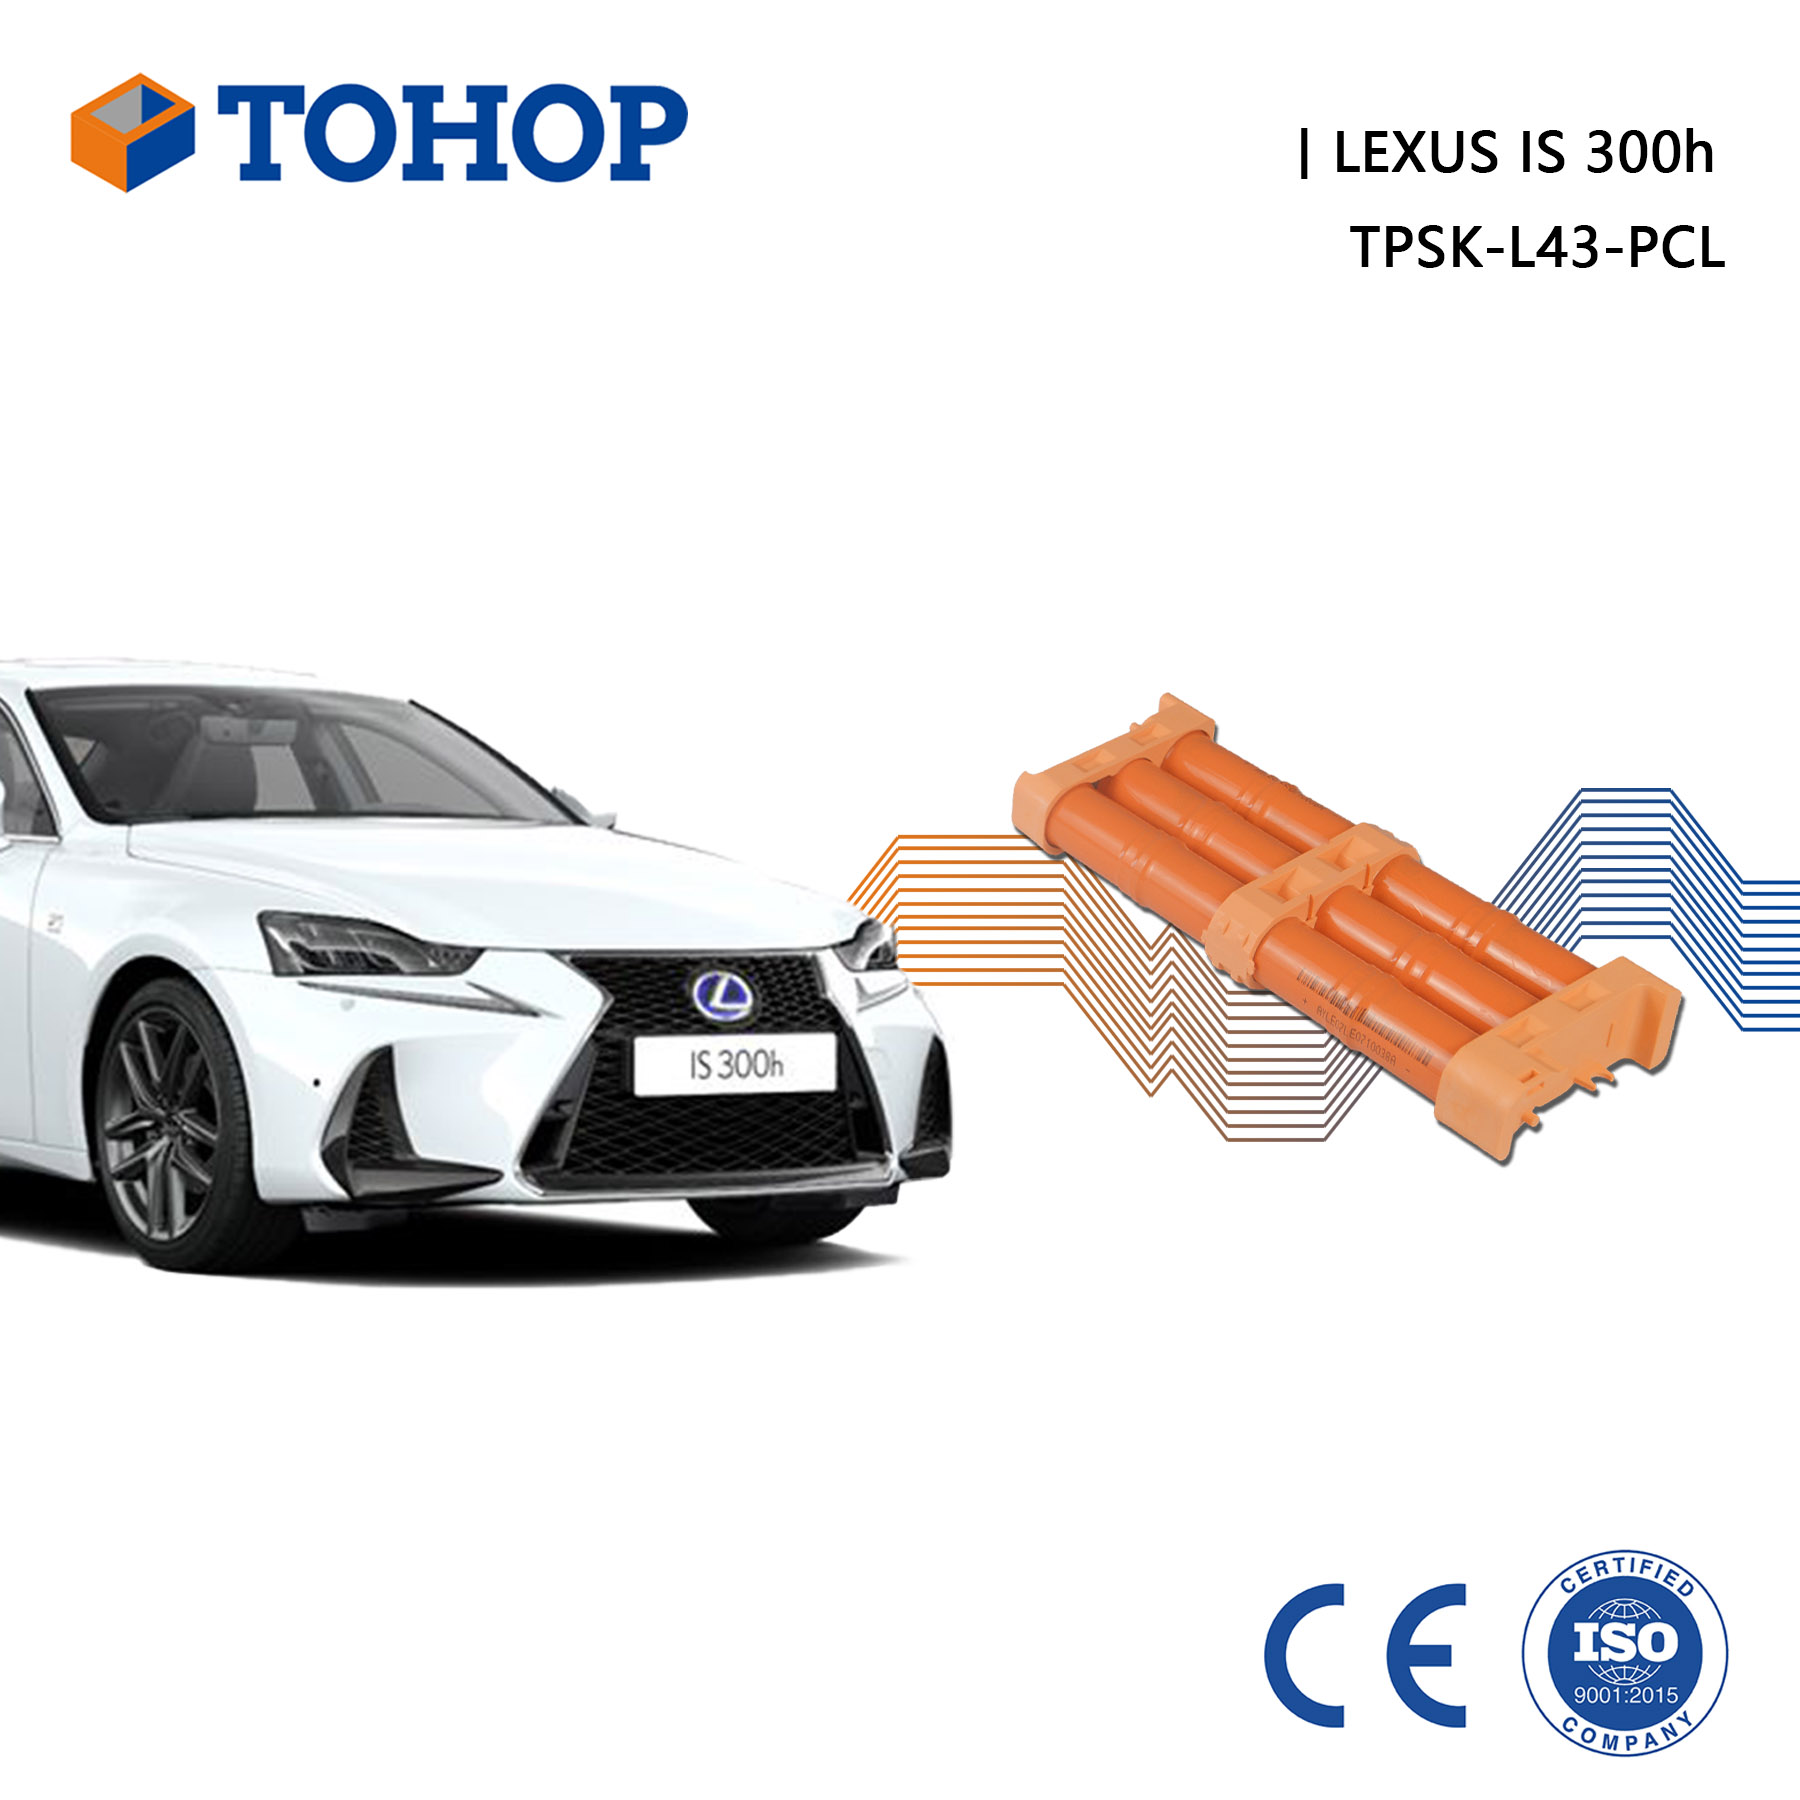 TOHOP Lexus IS 300h Hybrid Battery Replacement 14.4V 6.5Ah Brand New NiMH Cell